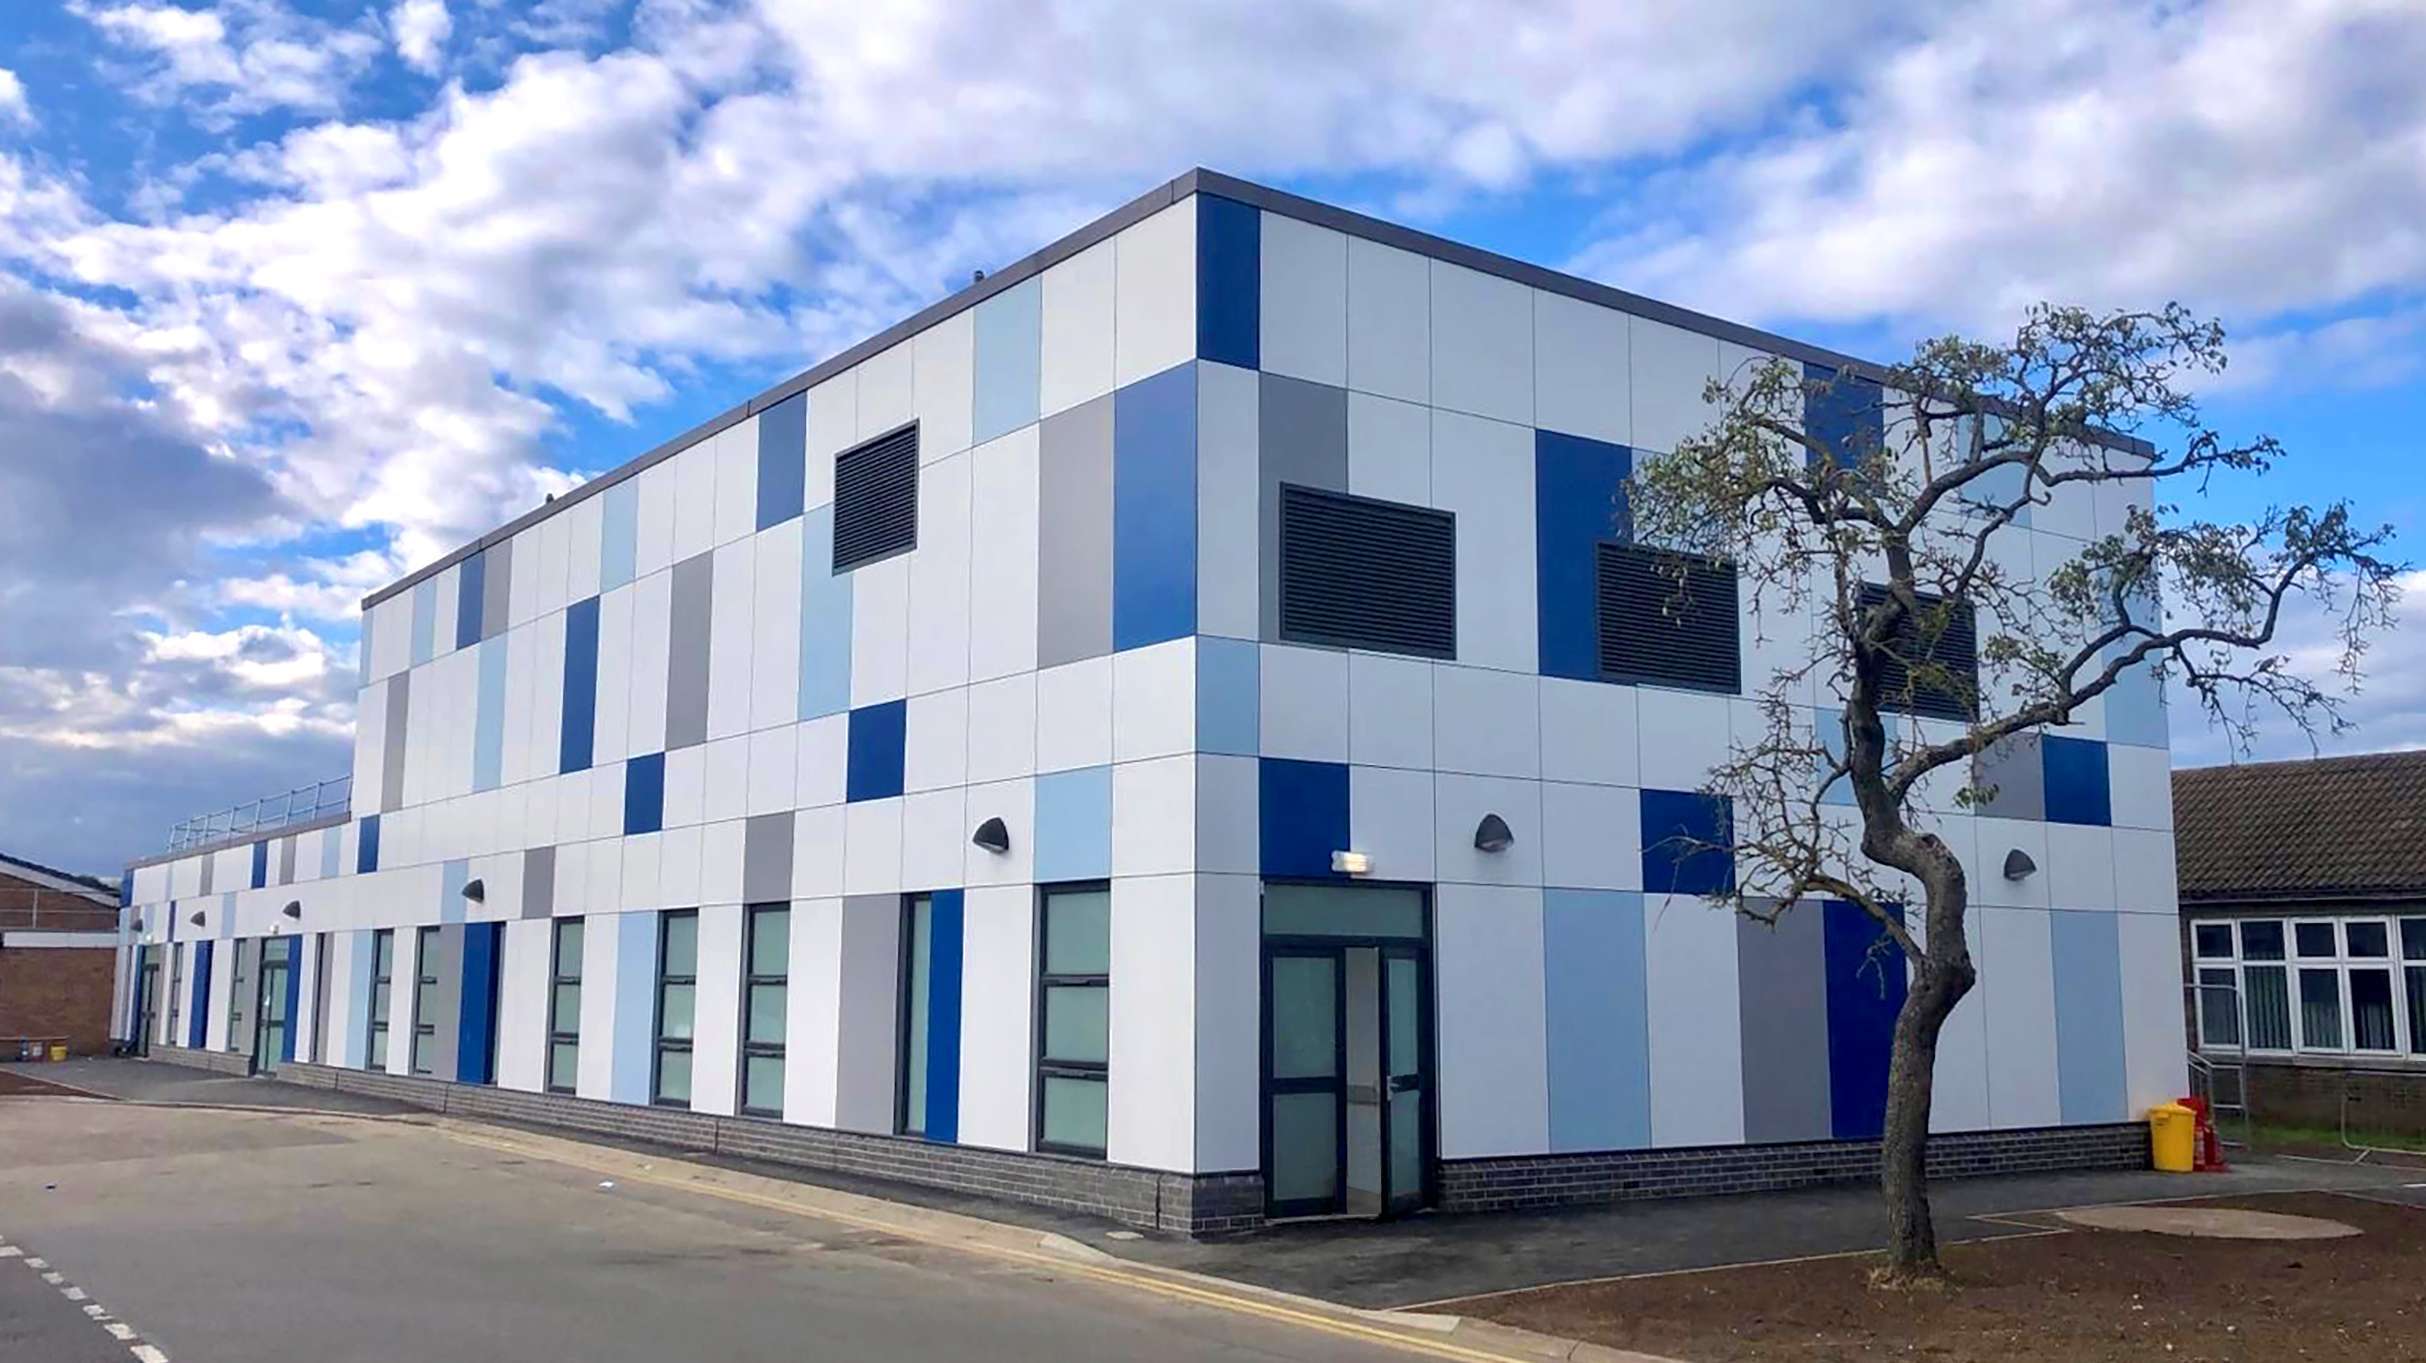 Three-quarter angle photo of the exterior of the Grantham project. The cladding of the building is a patchwork of cladding panels in white, grey and two shades of blue. The ground floor has a number of large windows and a double door to one end. In the foreground there is a large tree which is just beginning to come into leaf.